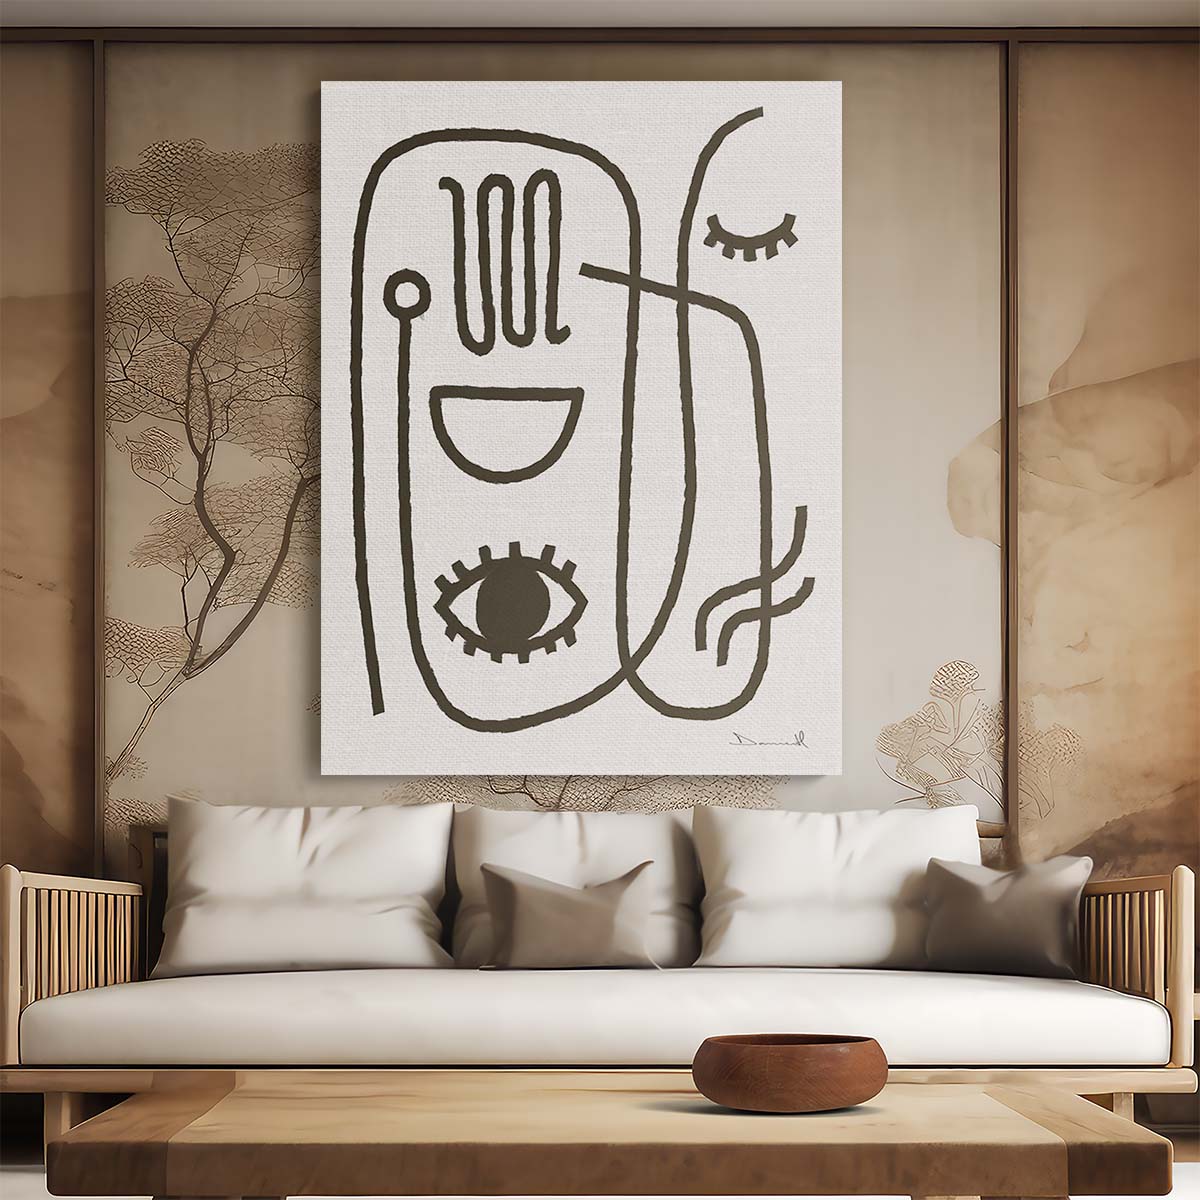 Modern Minimalistic Monochrome Abstract Illustration by Dan Hobday by Luxuriance Designs, made in USA